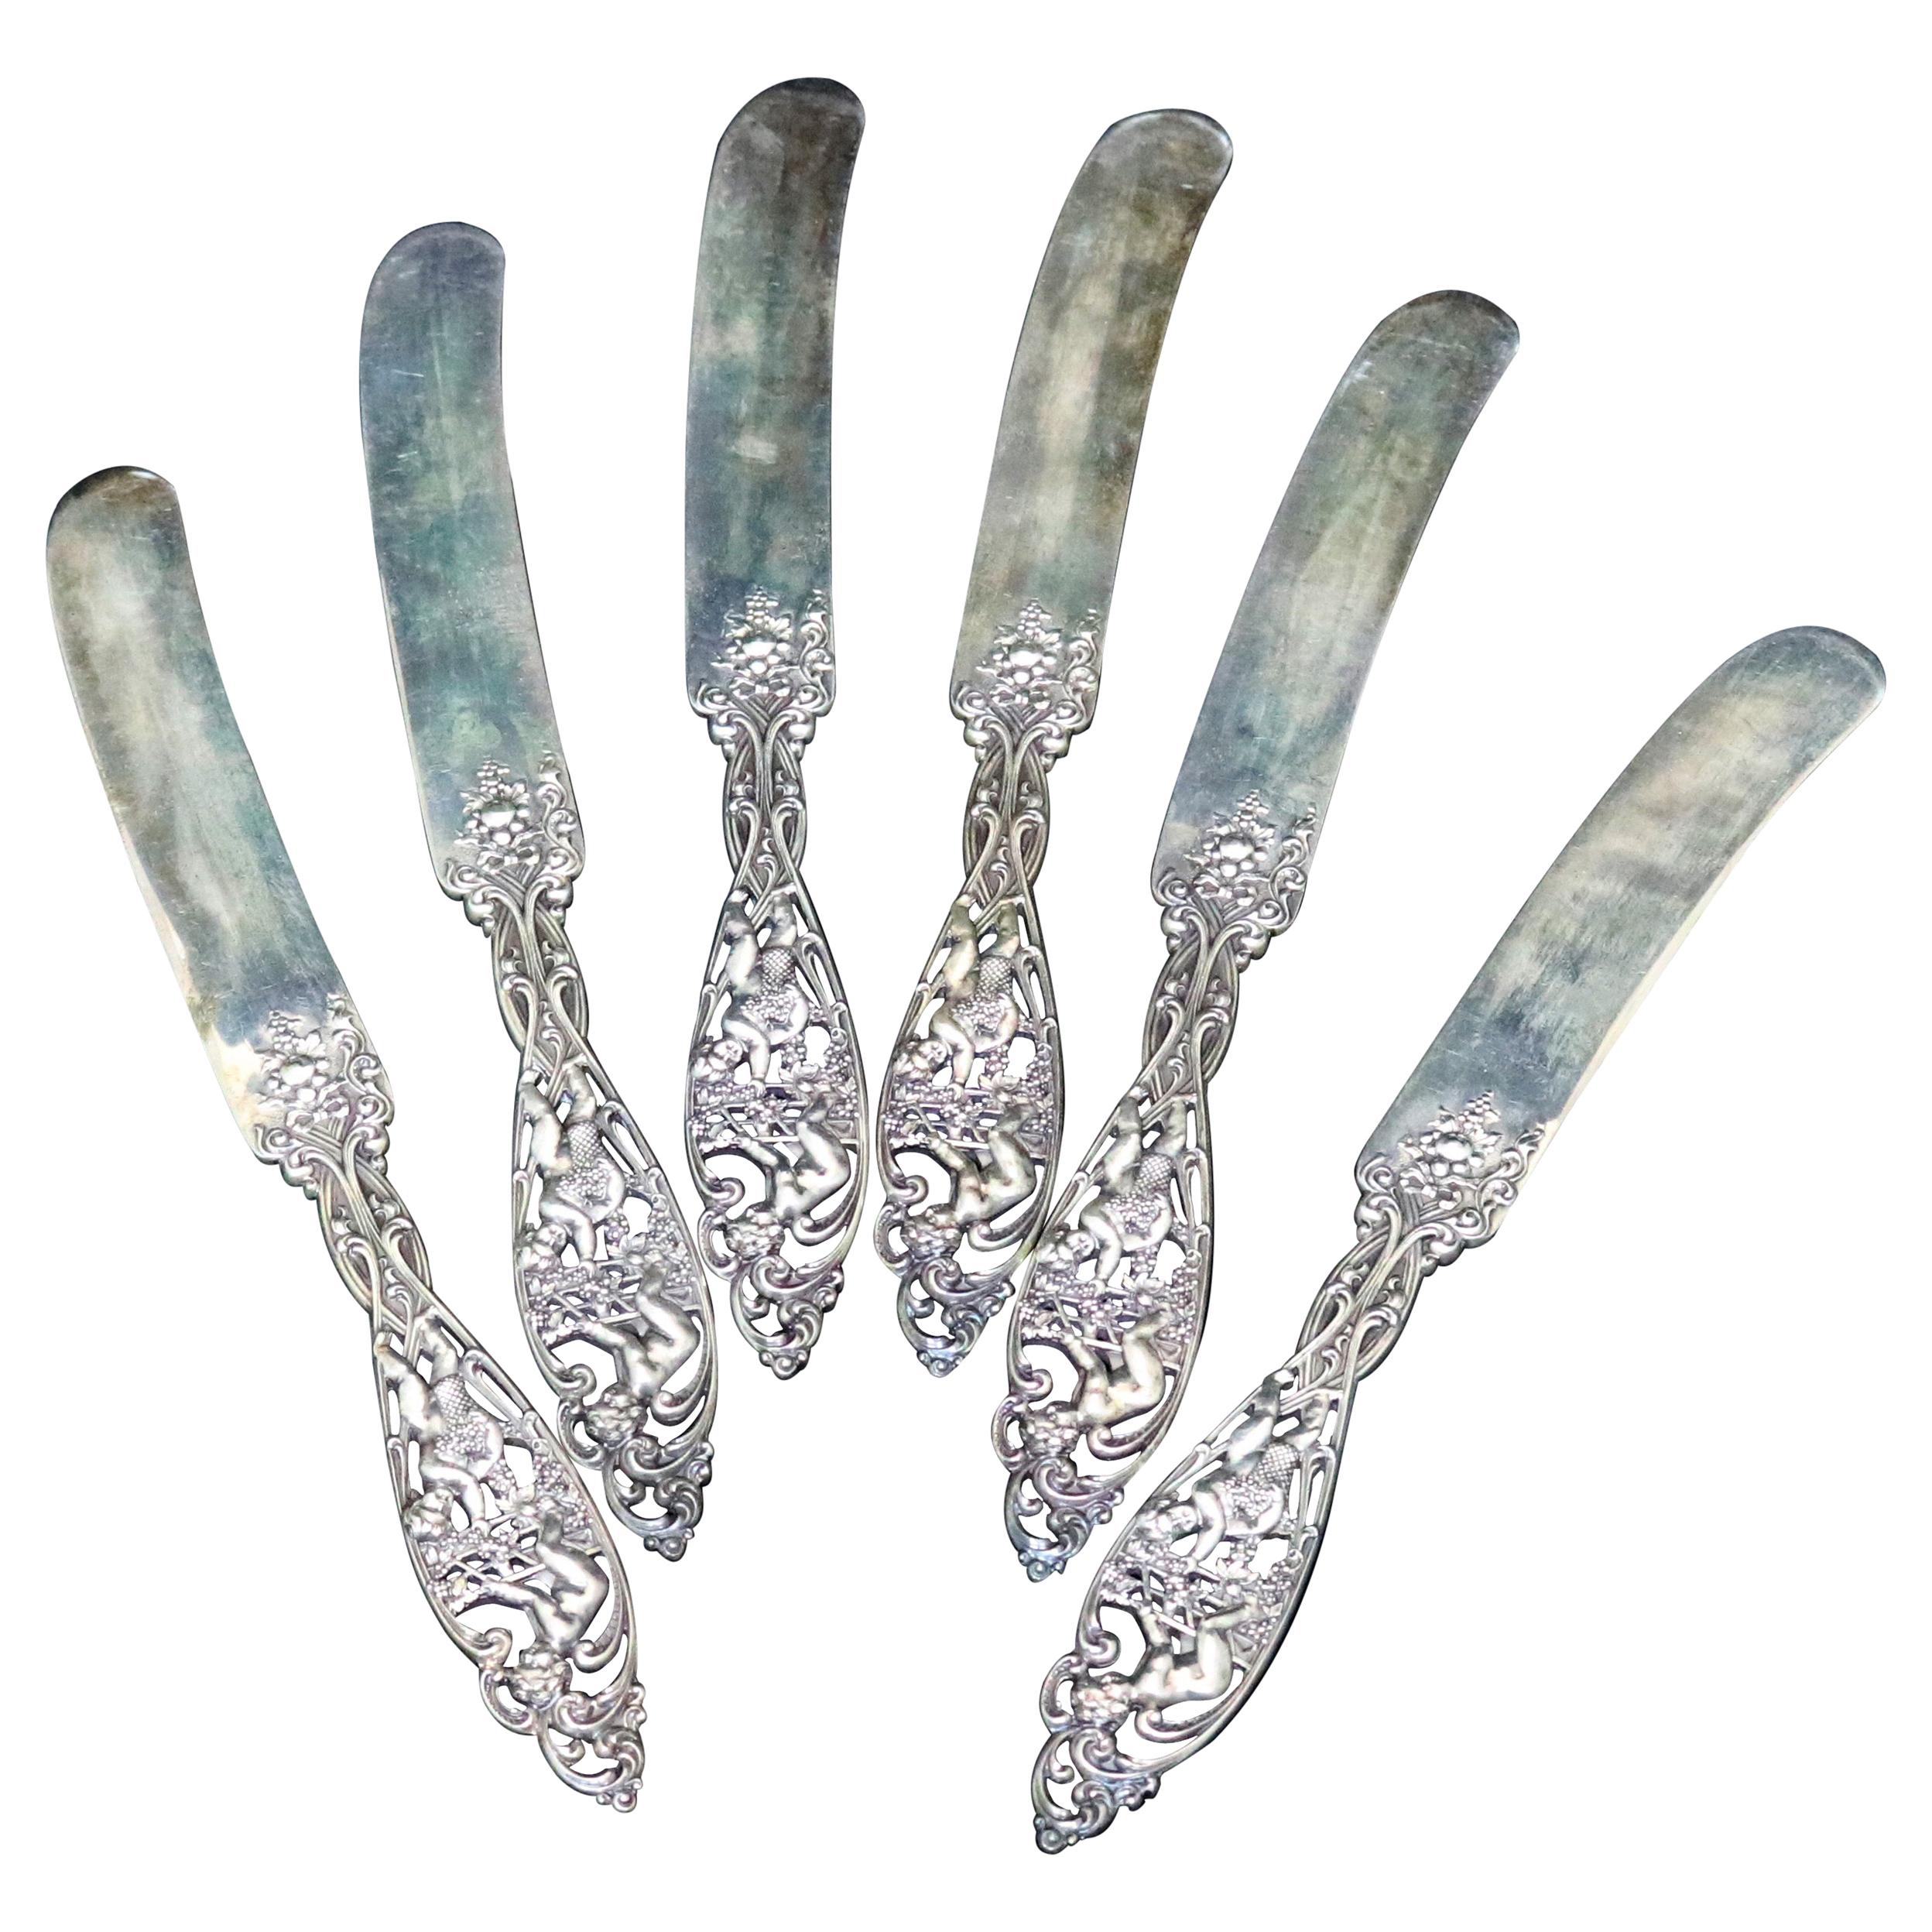 Six Sterling Silver Figural "Labors of Cupid" Knives by Dominick & Haff